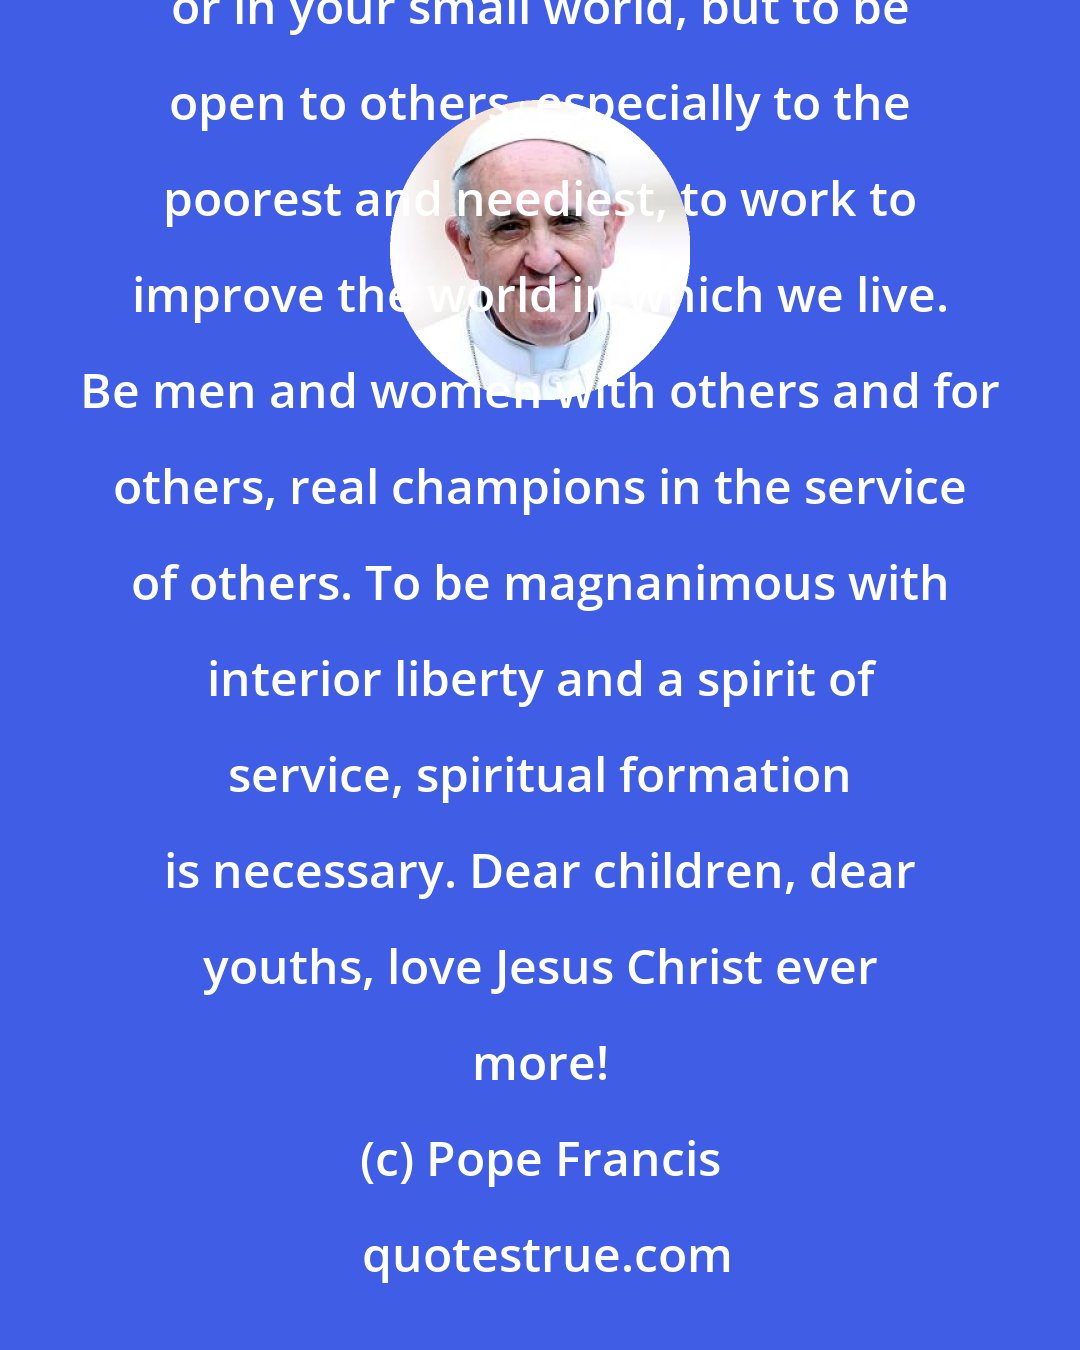 Pope Francis: In your school you take part in various activities that habituate you not to shut yourselves in on yourselves or in your small world, but to be open to others, especially to the poorest and neediest, to work to improve the world in which we live. Be men and women with others and for others, real champions in the service of others. To be magnanimous with interior liberty and a spirit of service, spiritual formation is necessary. Dear children, dear youths, love Jesus Christ ever more!